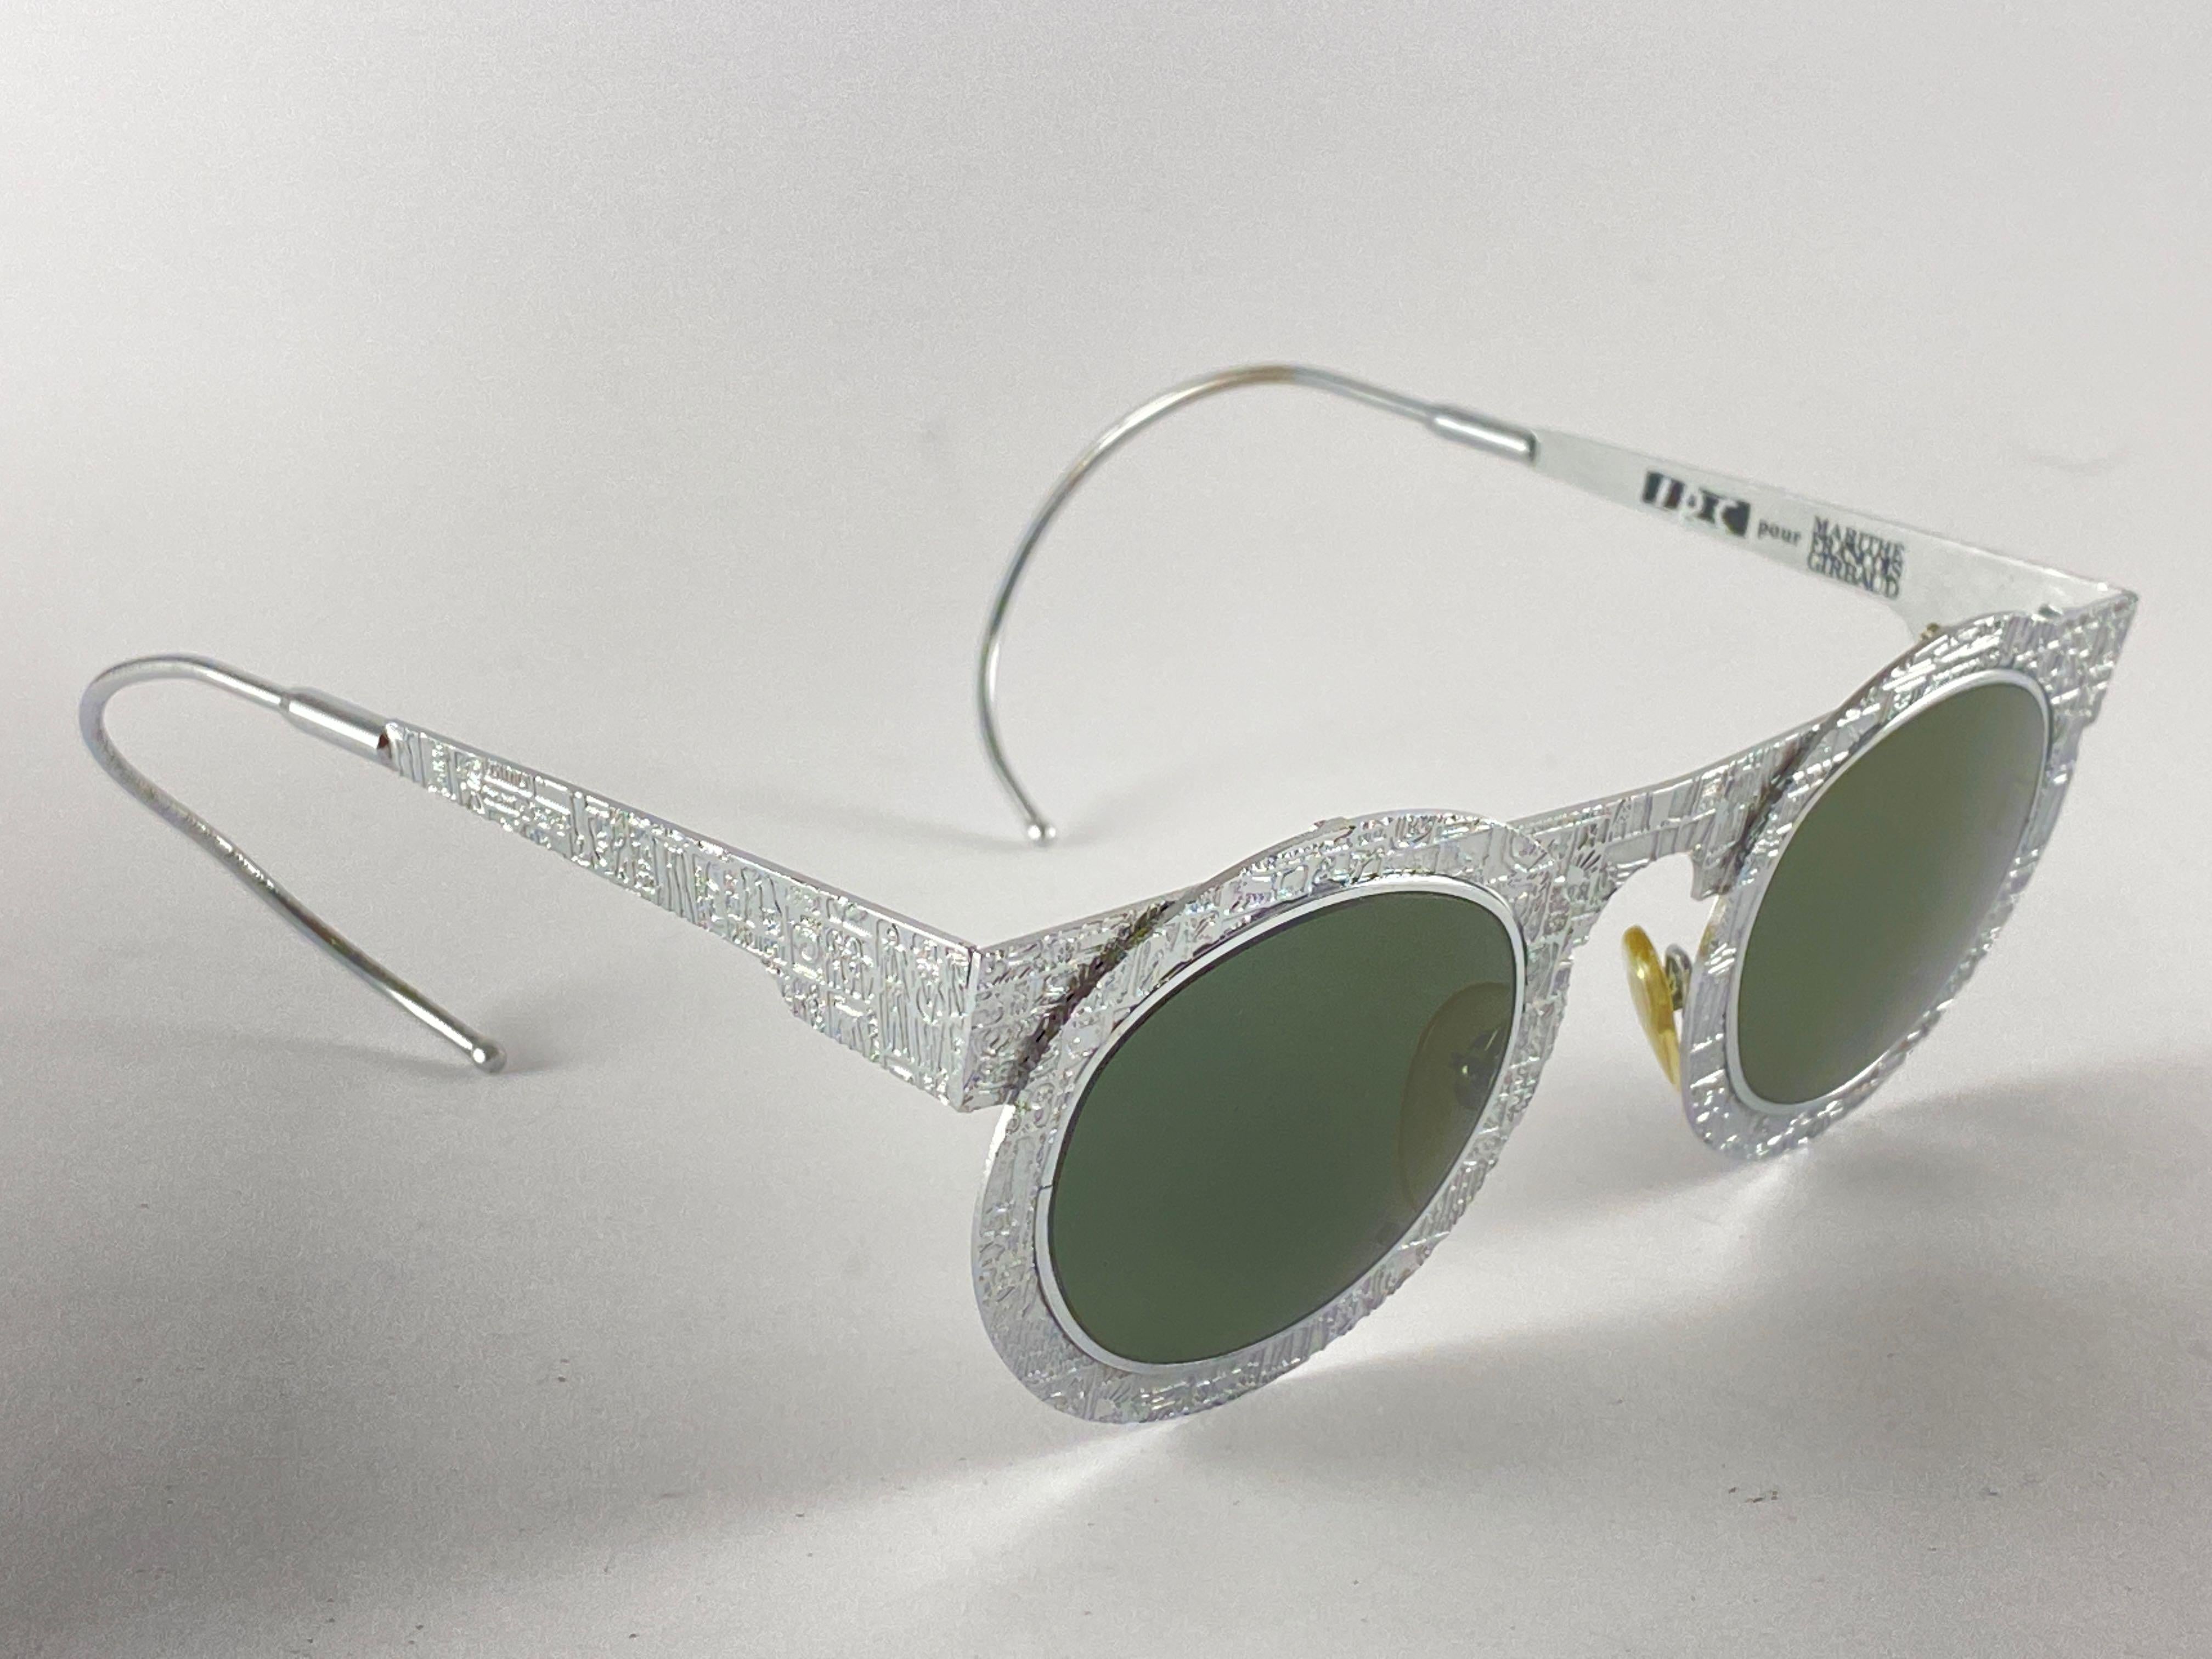 New Vintage IDC Pour Marithe Francois Girbaud Round Silver Sunglasses France For Sale 3